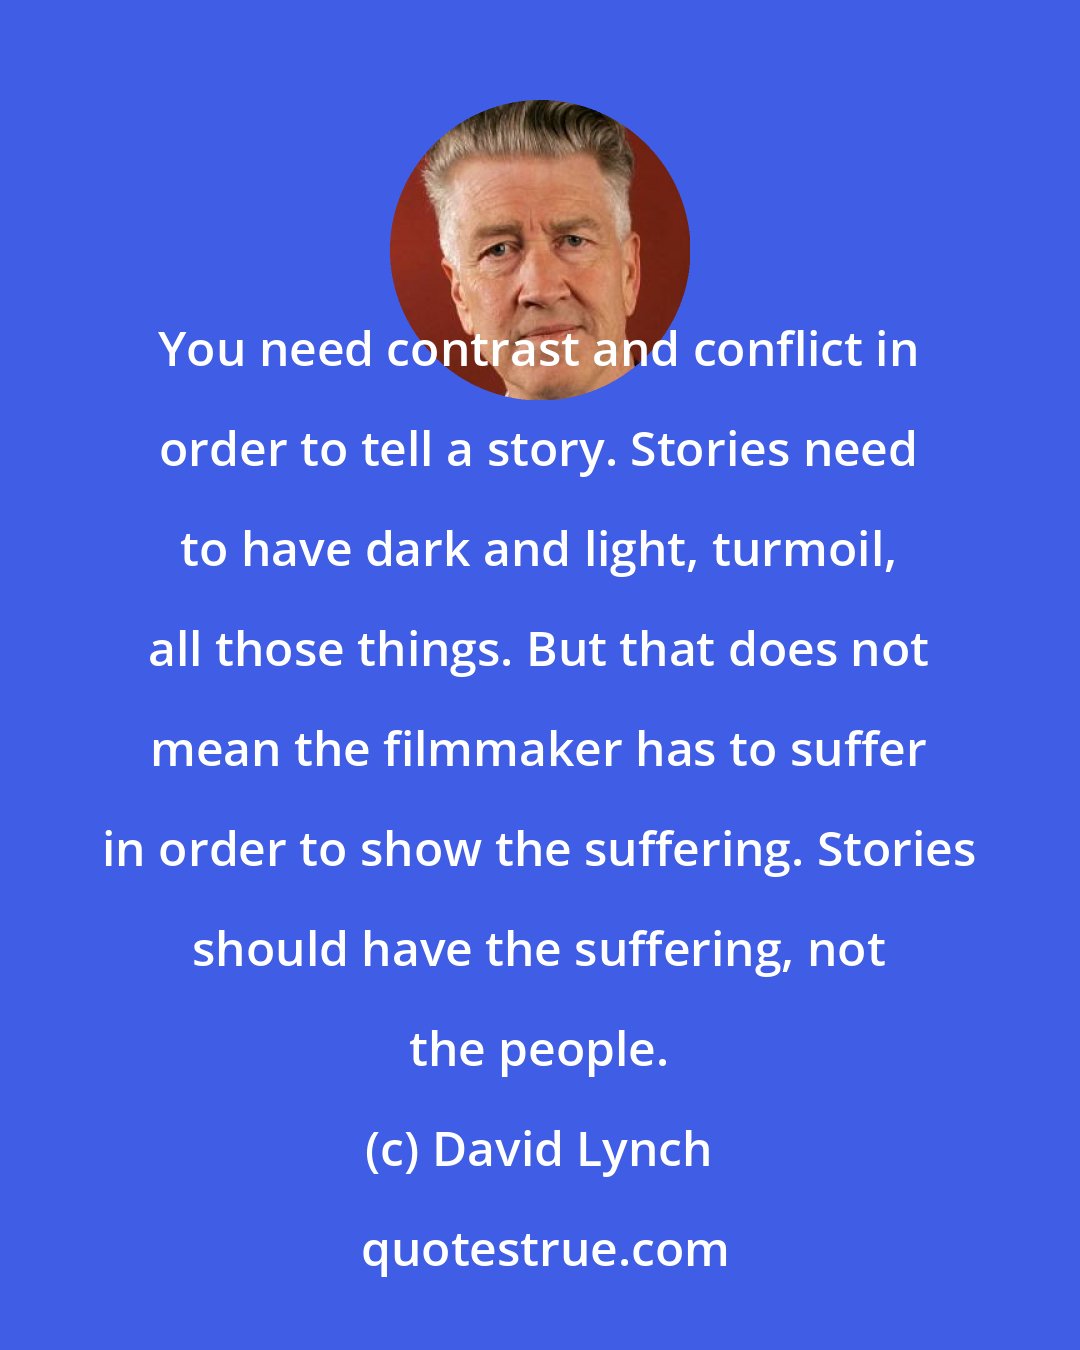 David Lynch: You need contrast and conflict in order to tell a story. Stories need to have dark and light, turmoil, all those things. But that does not mean the filmmaker has to suffer in order to show the suffering. Stories should have the suffering, not the people.